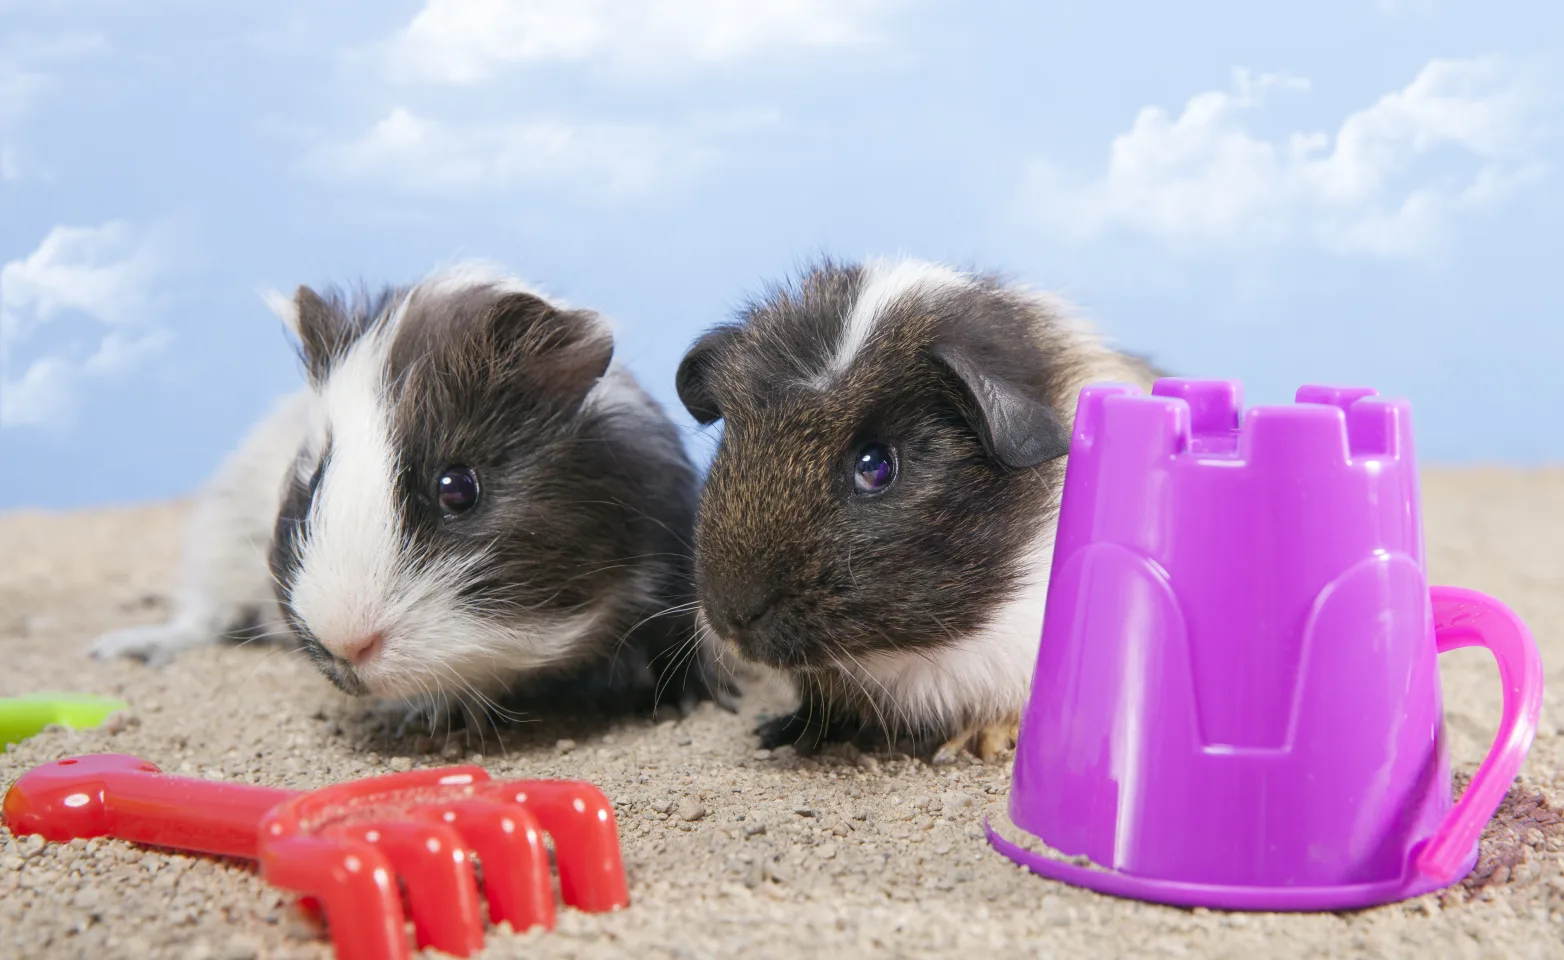 Two guinea pigs with toys.